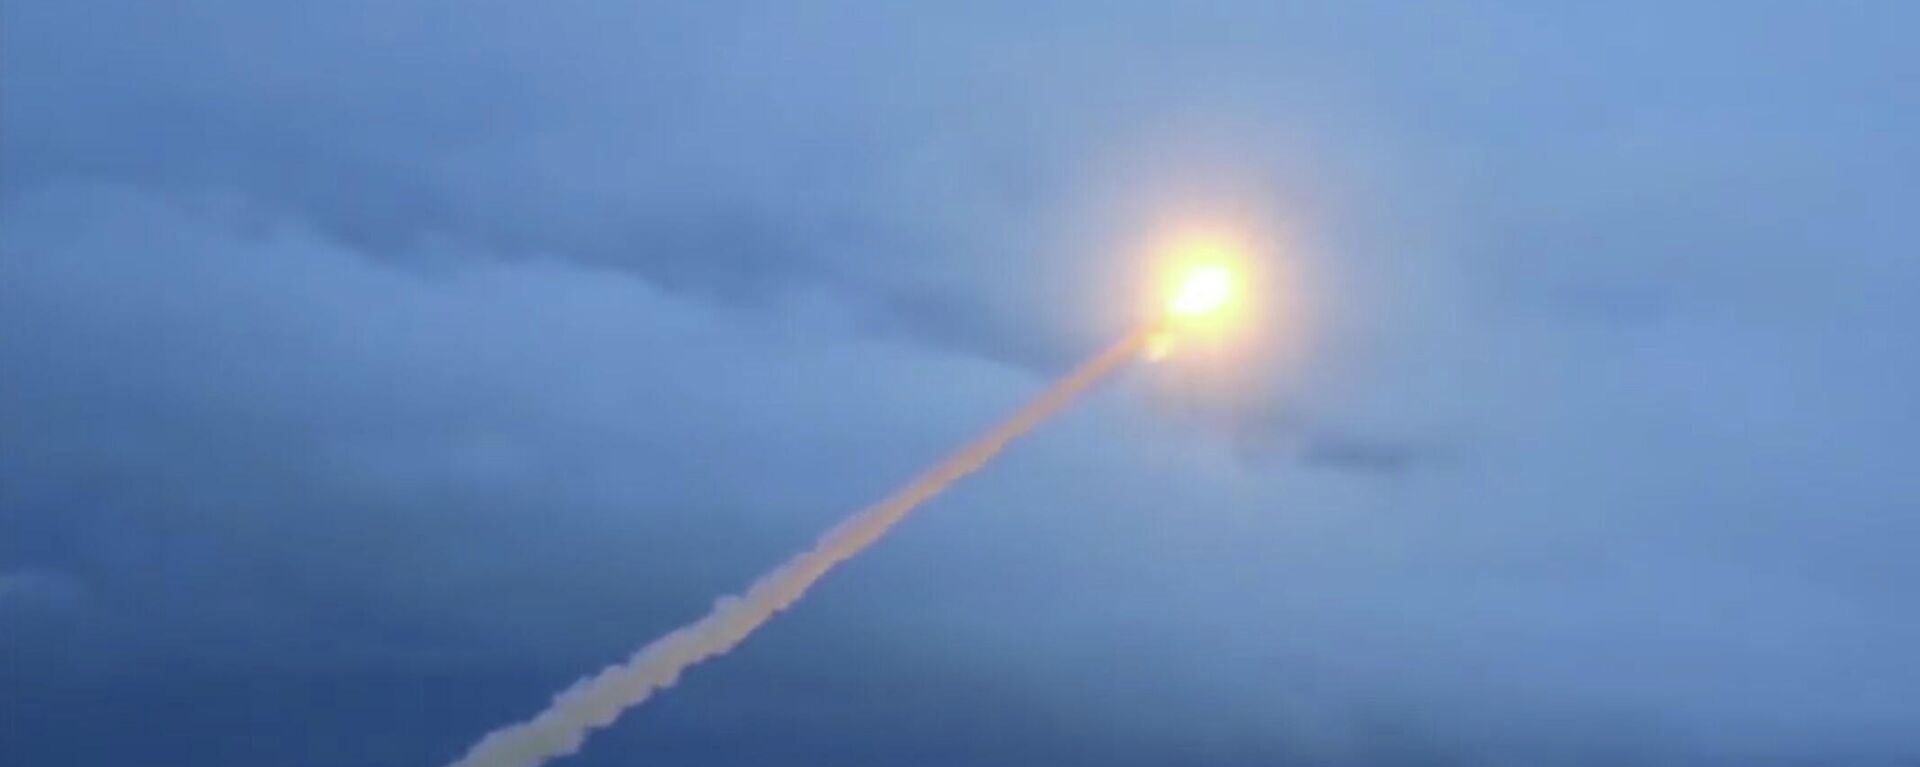 Trial launch of Russian cruise missile with nuclear powered engine  9M730 Burevestnik (NATO reporting name: SSC-X-9 Skyfall) - Sputnik International, 1920, 10.03.2022